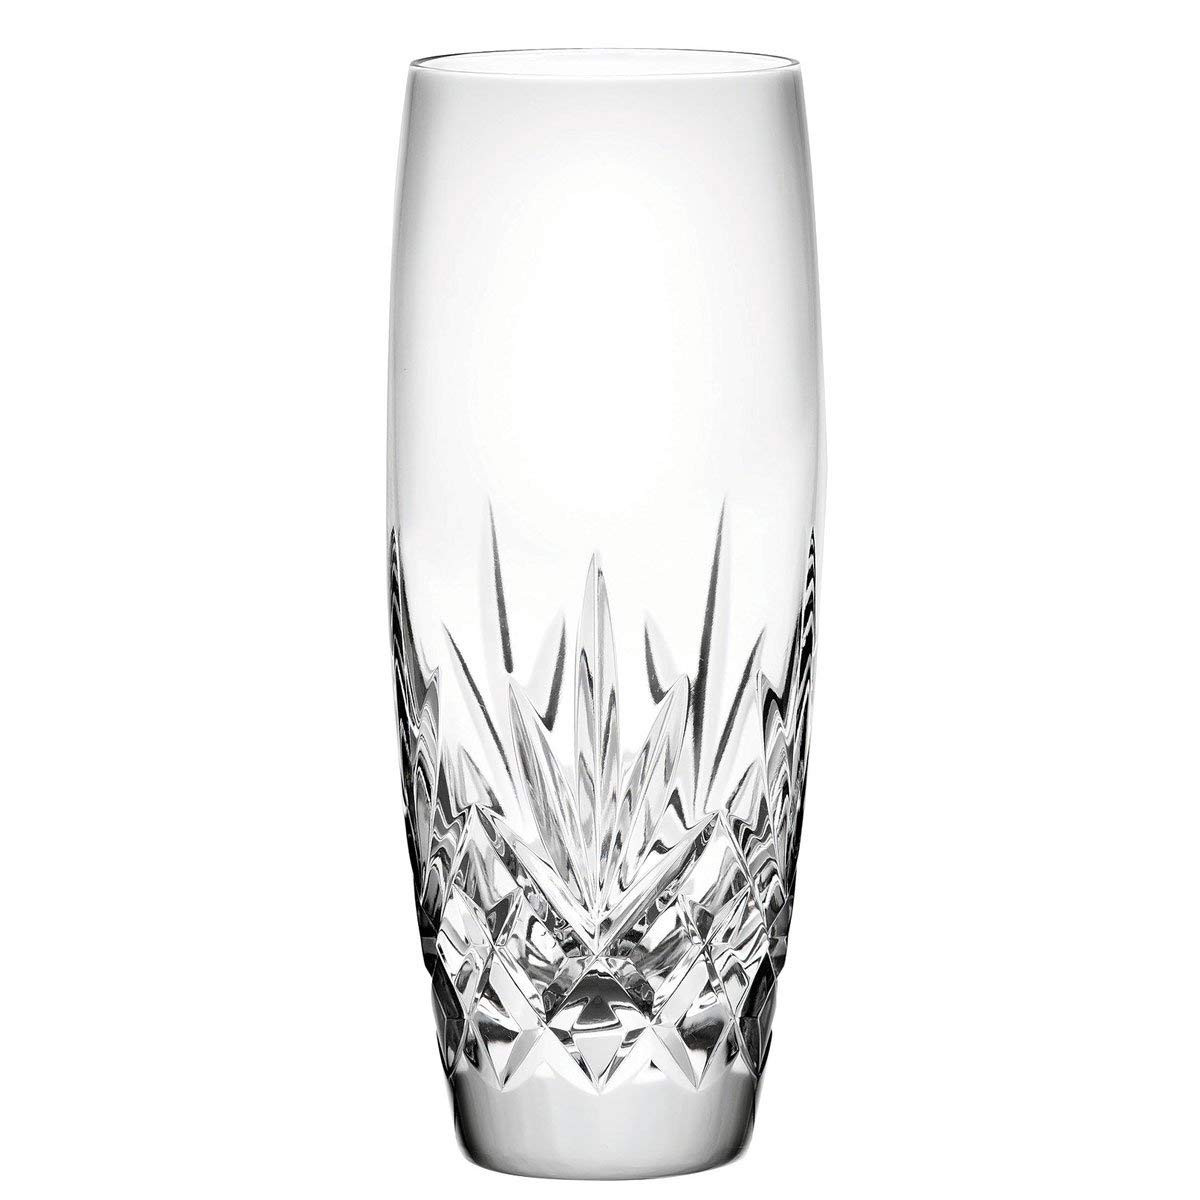 21 Unique Waterford Lismore Candy Bud Vase 2023 free download waterford lismore candy bud vase of amazon com waterford crystal finola stem vase 6 1 home kitchen with 613pkwqnbwl sl1200